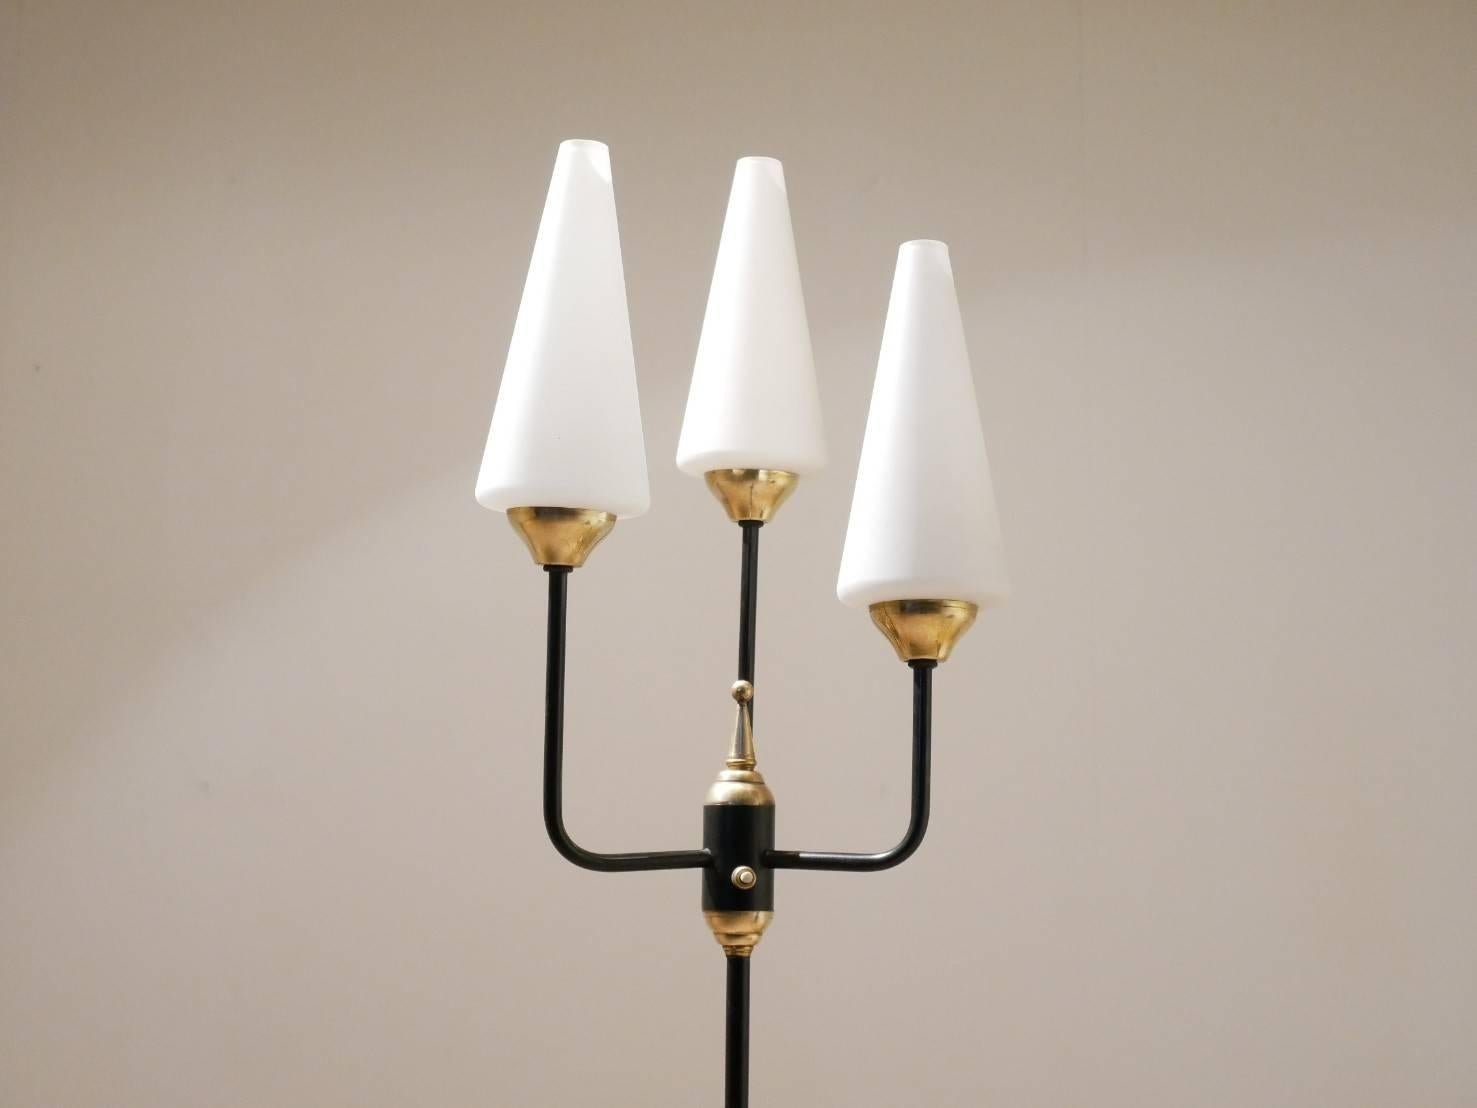 Midcentury, French floor lamp from Maison Arlus, tripod metal feet and central rod matched with brass accents. 3x opalescent glass diffusers.
Lamp is fitted with new E14 sockets.